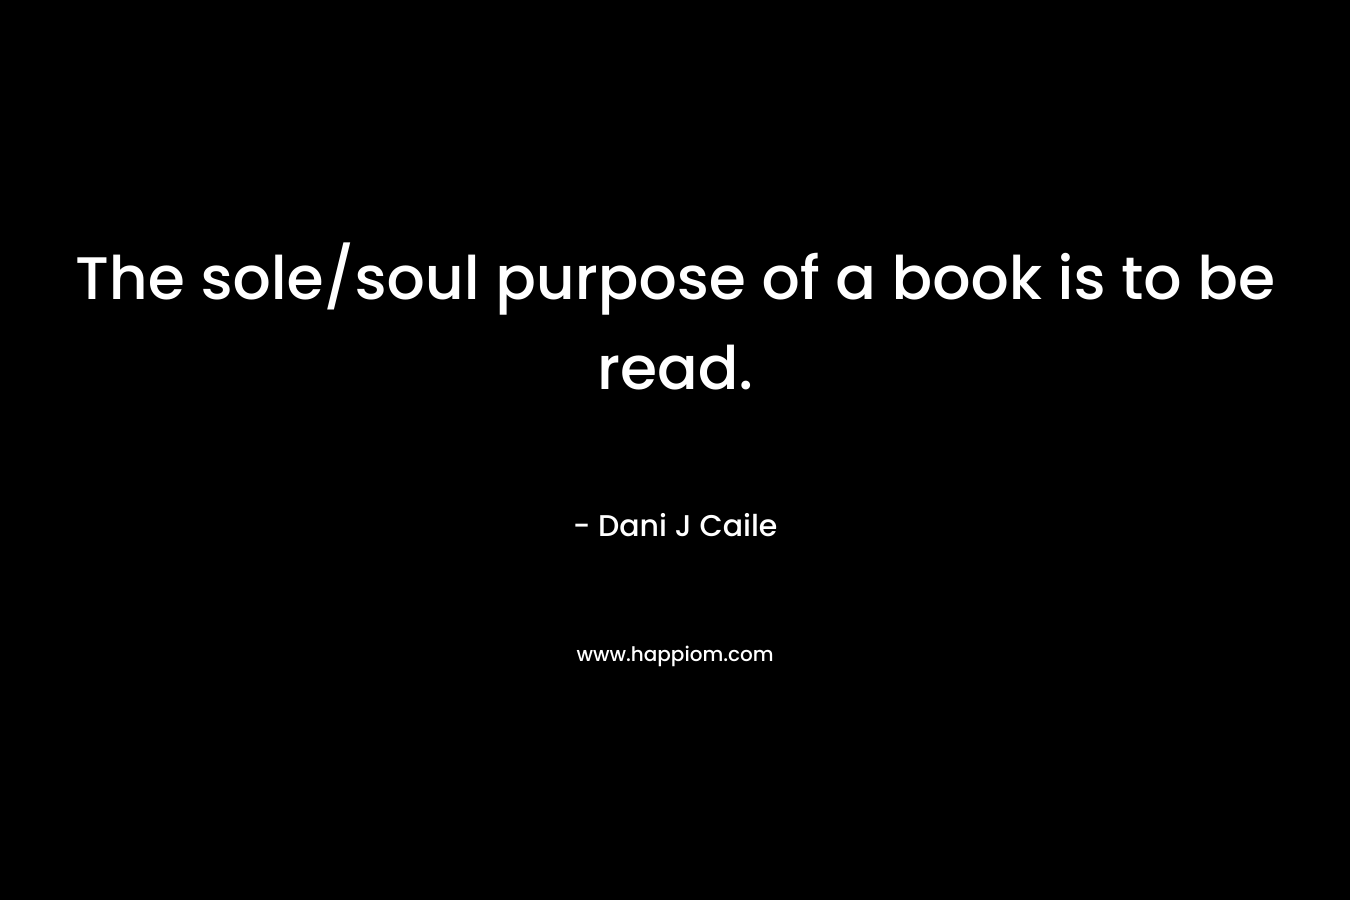 The sole/soul purpose of a book is to be read.